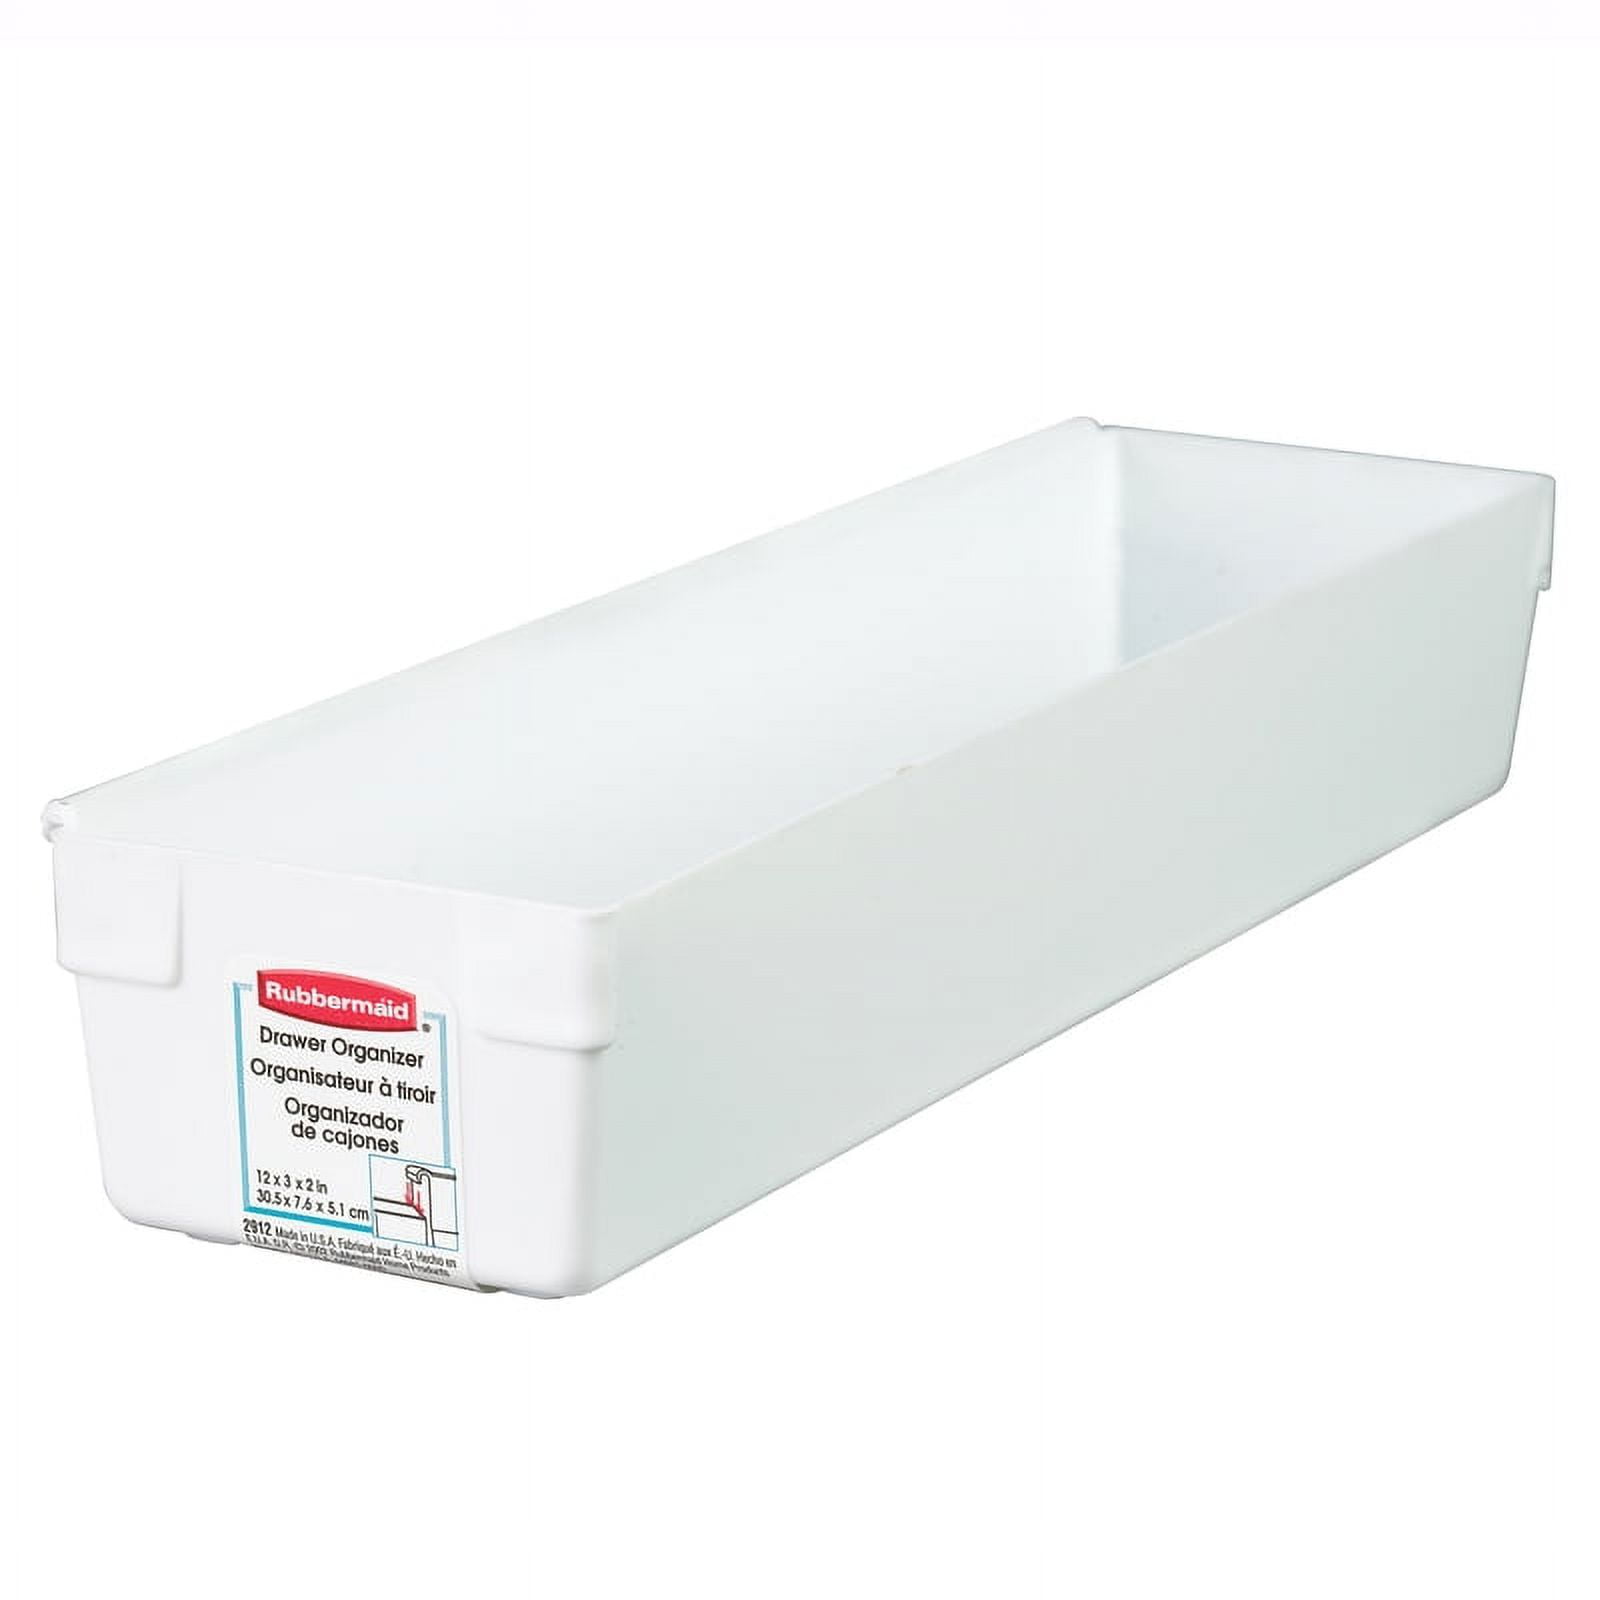 Rubbermaid Drawer Organizer, 12 by 3 by 2-Inch, White